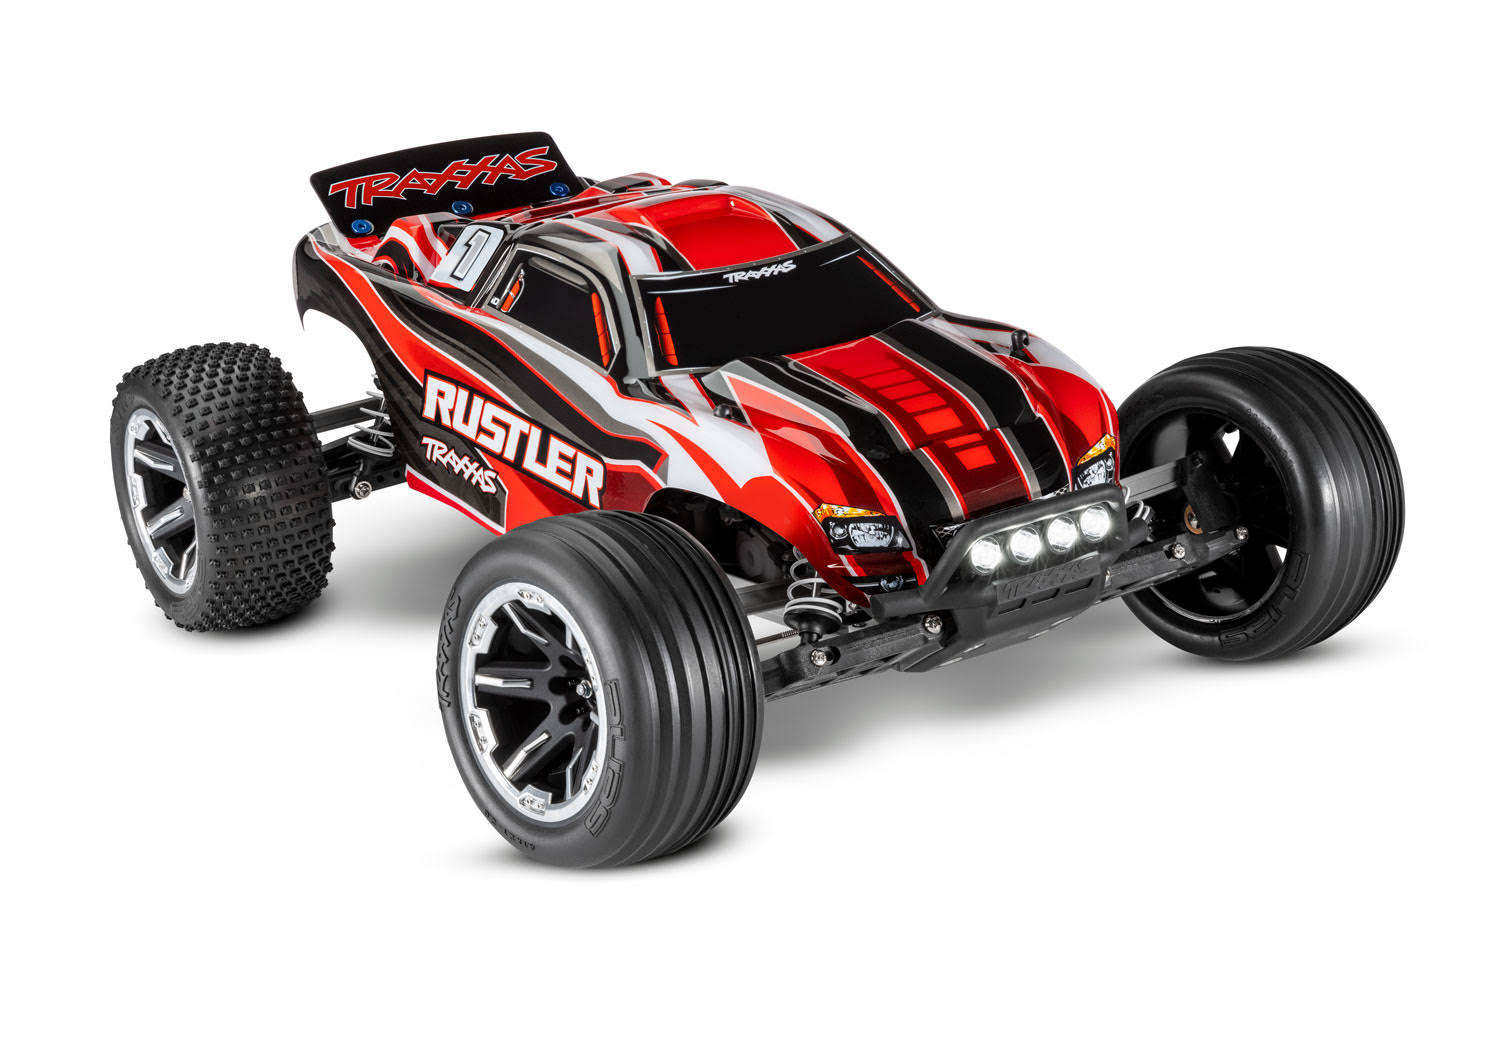 Traxxas Rustler 1/10 RTR with LED Lights, Battery and charger. Red